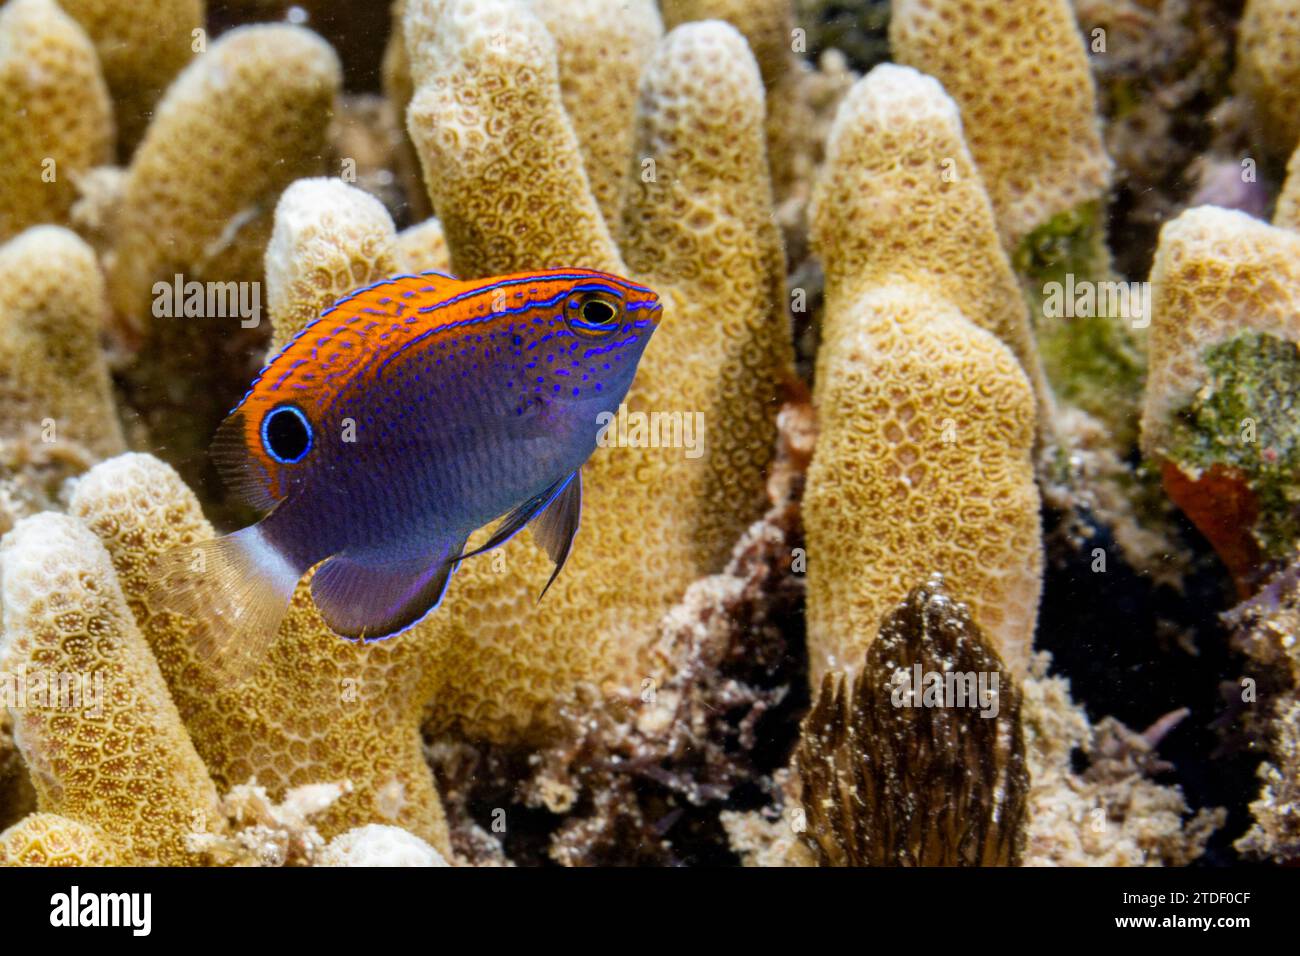 An adult speckled damsel (Pomacentrus bankanensis), off the reef on Wohof Island, Raja Ampat, Indonesia, Southeast Asia Stock Photo